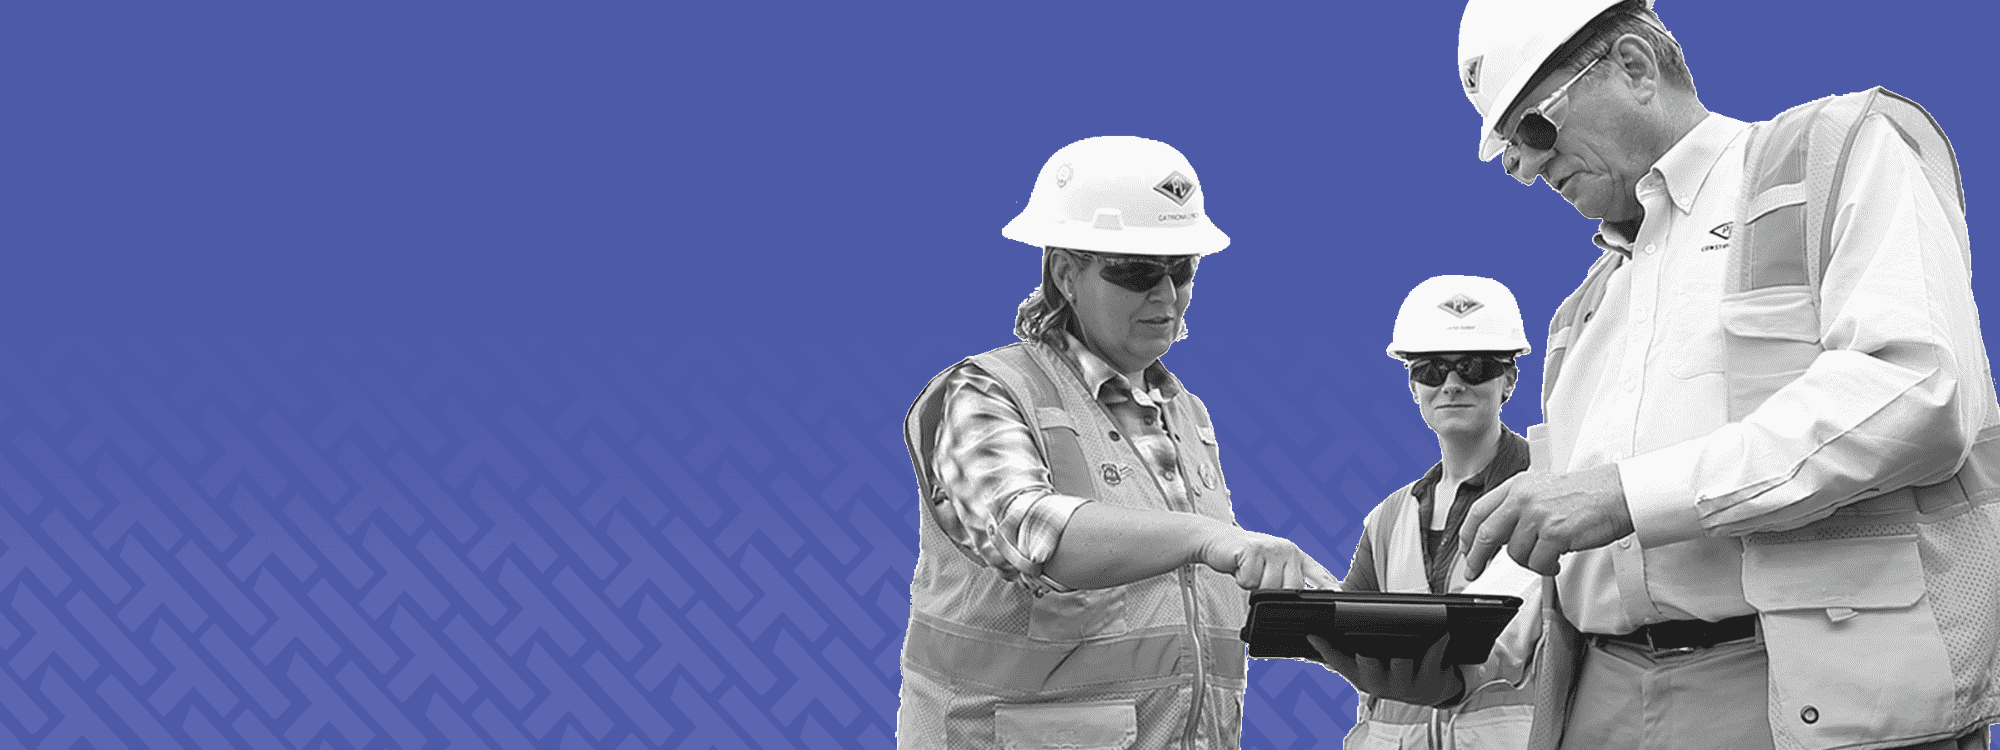 Black and white cut-out image of construction workers using HammerTech construction safety software on a tablet over purple HammerTech background.